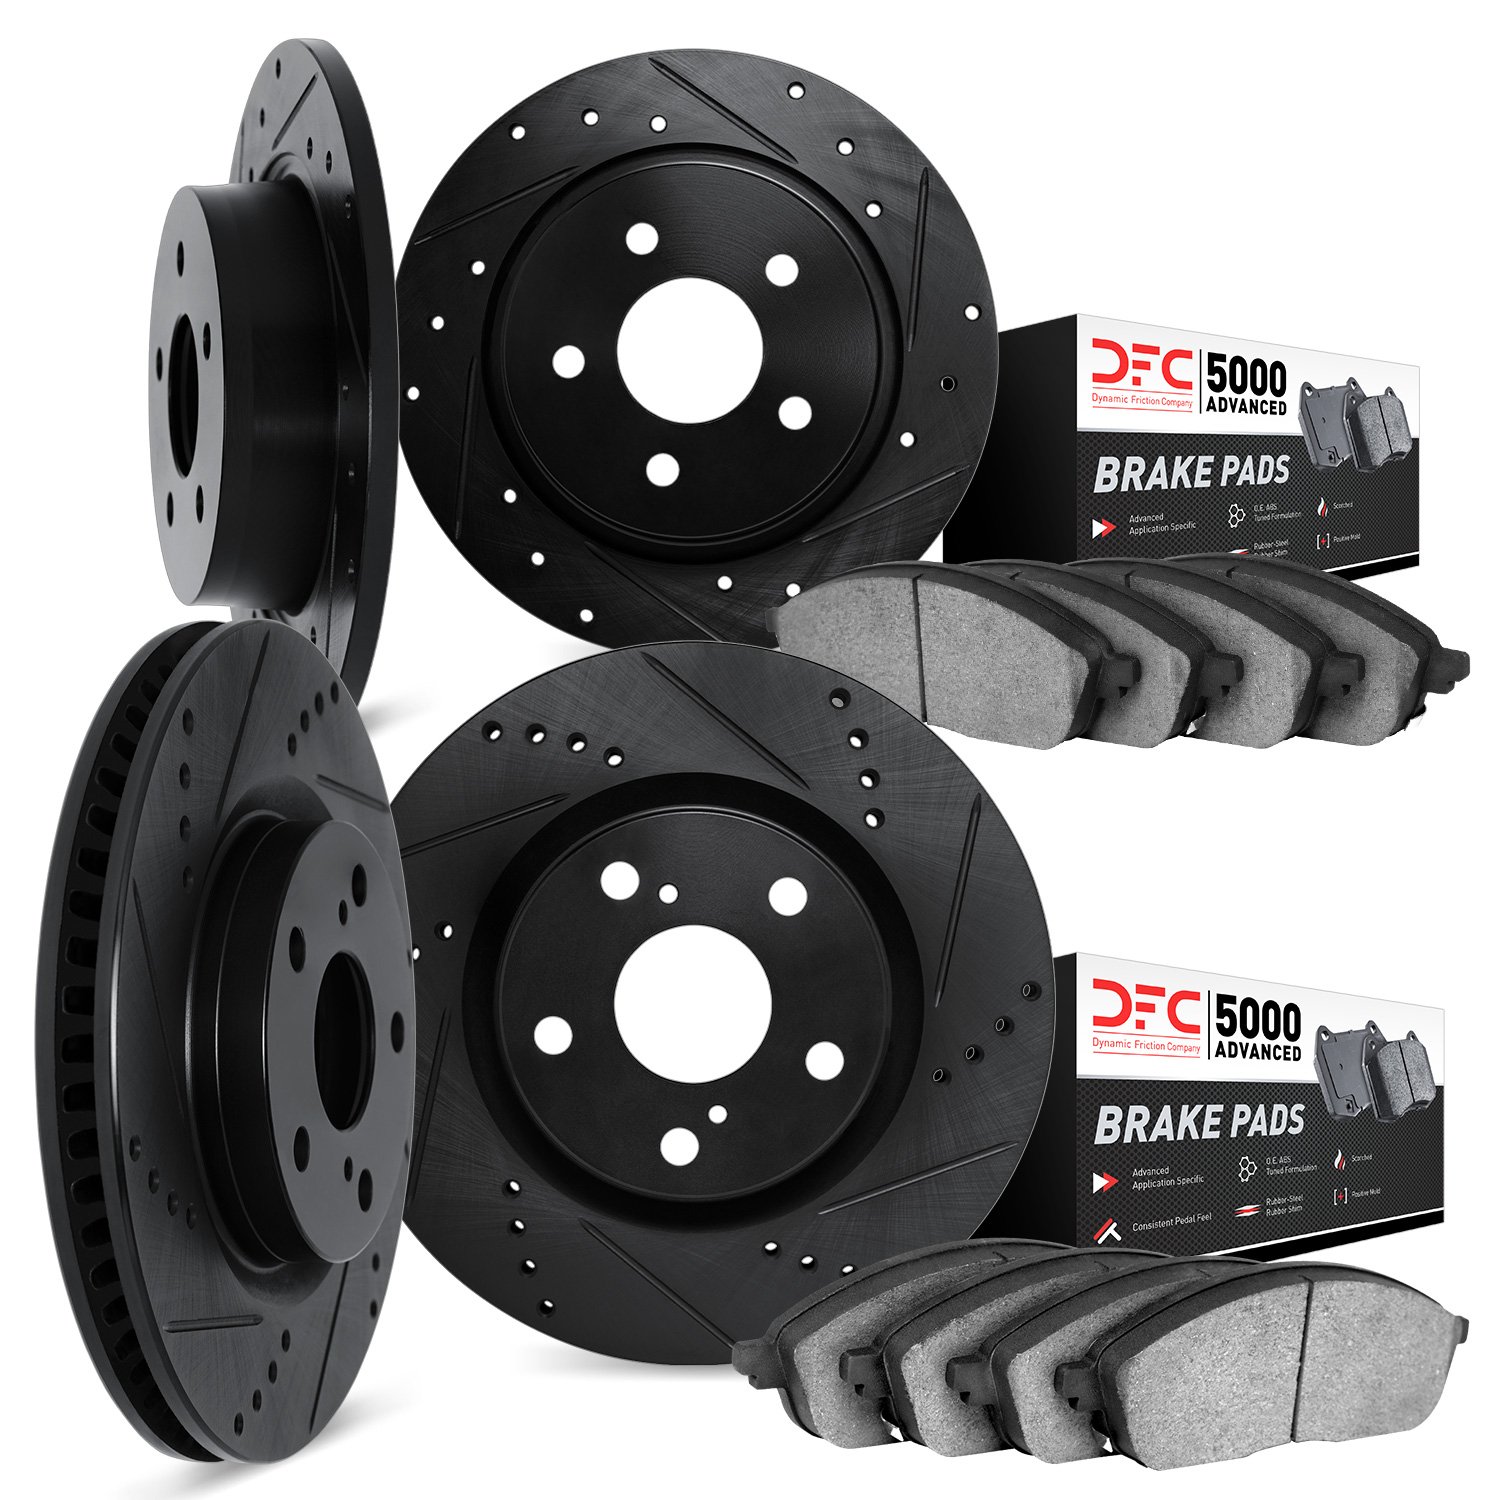 8504-45013 Drilled/Slotted Brake Rotors w/5000 Advanced Brake Pads Kit [Black], 1984-1988 GM, Position: Front and Rear